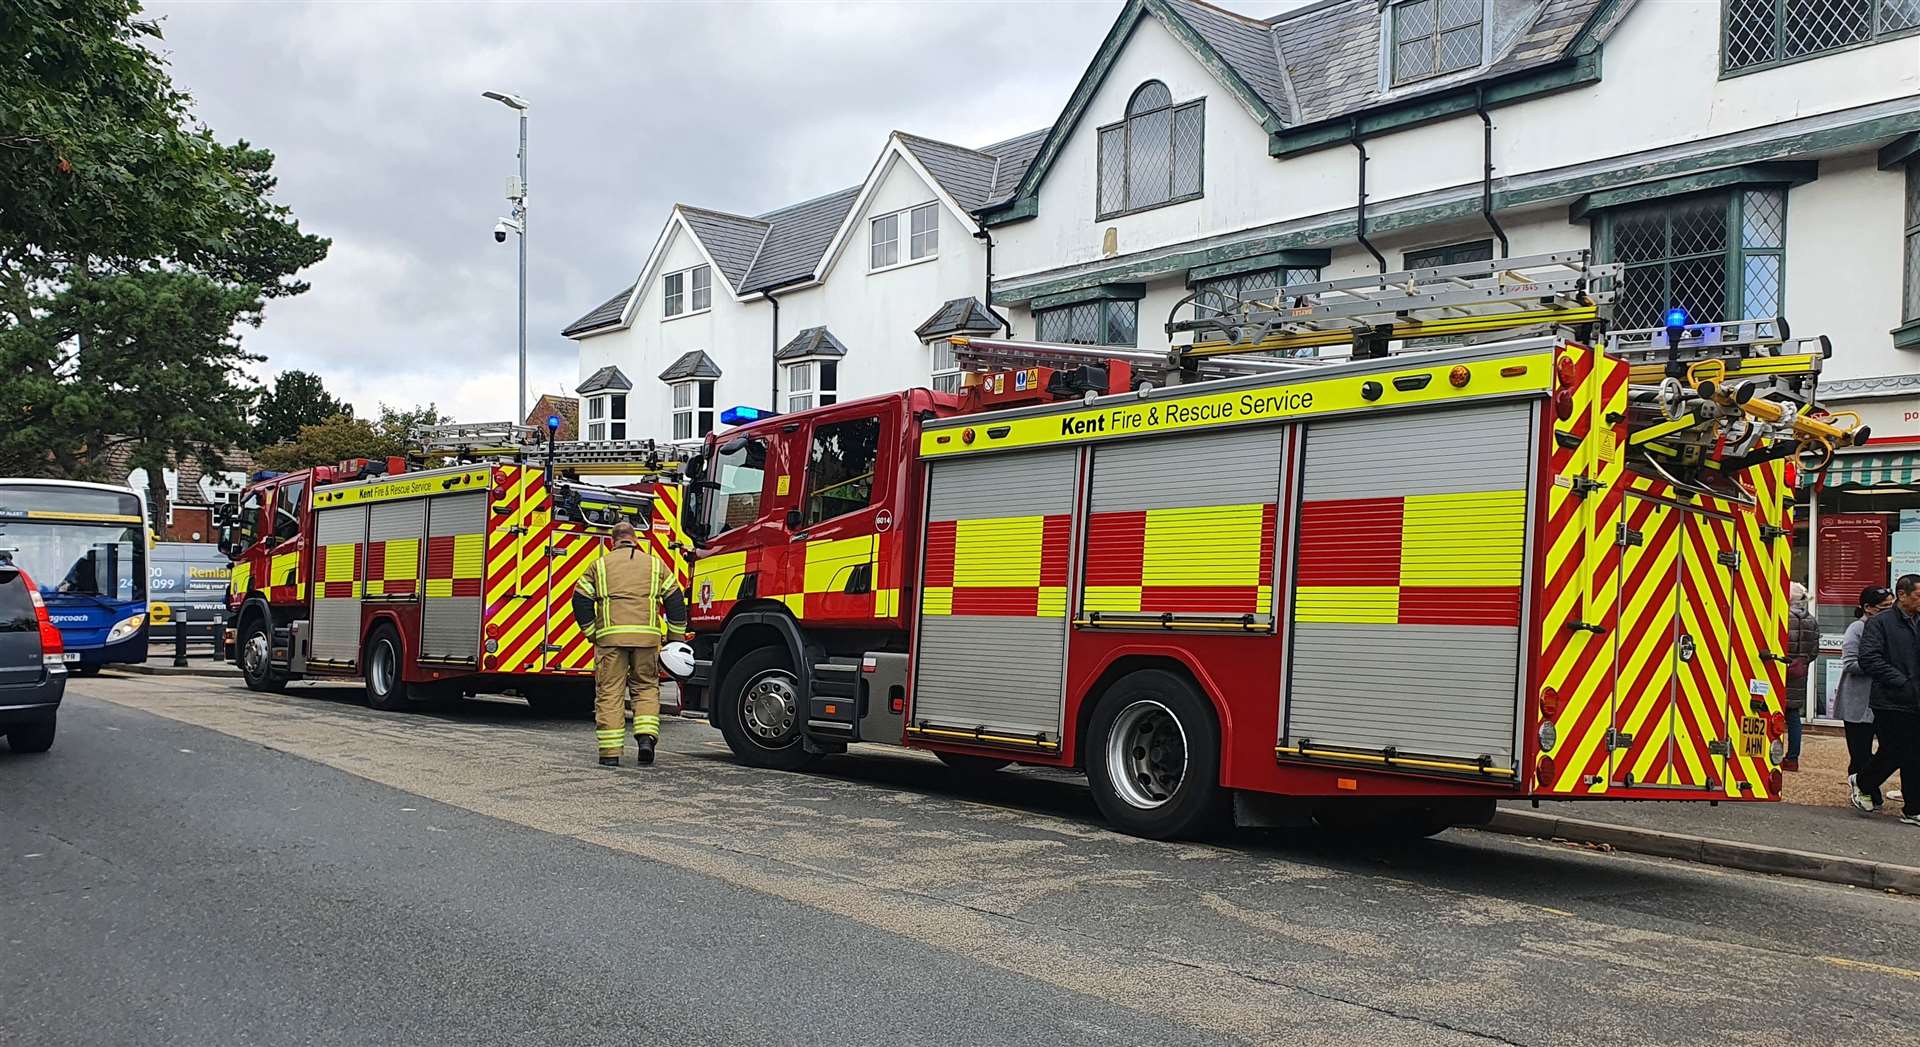 Fire engines at the scene of an incident